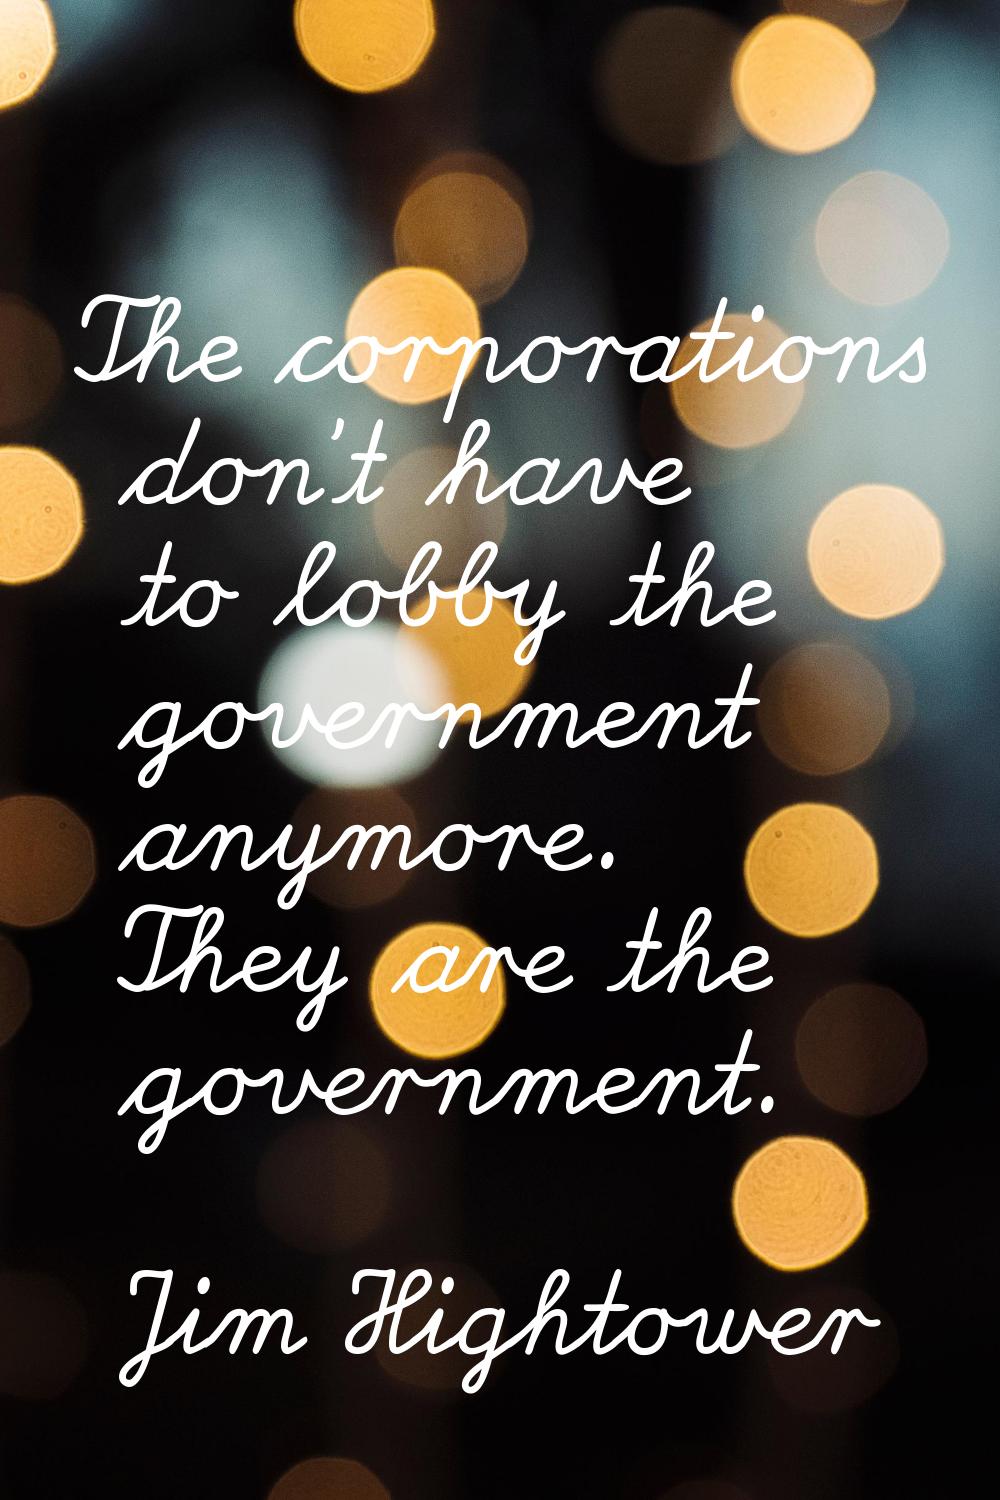 The corporations don't have to lobby the government anymore. They are the government.